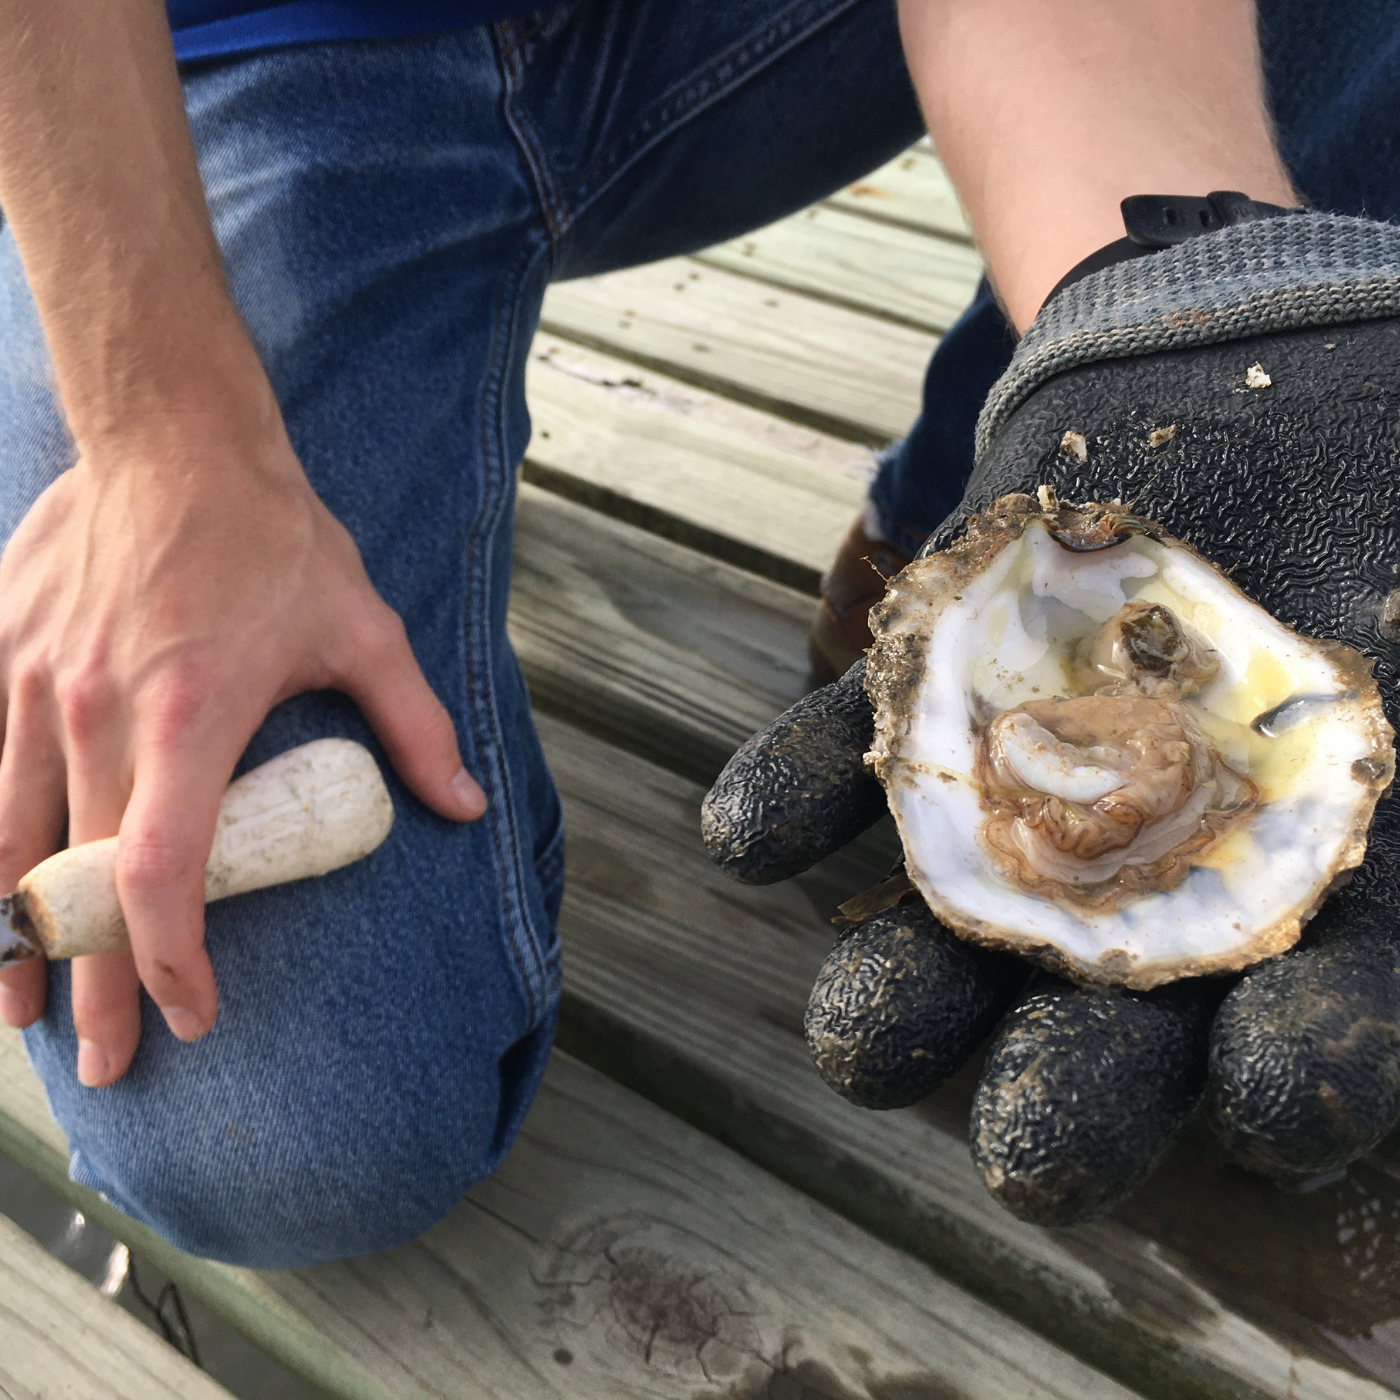 Episode 87: 'Have I Had My Last Good Oyster?'